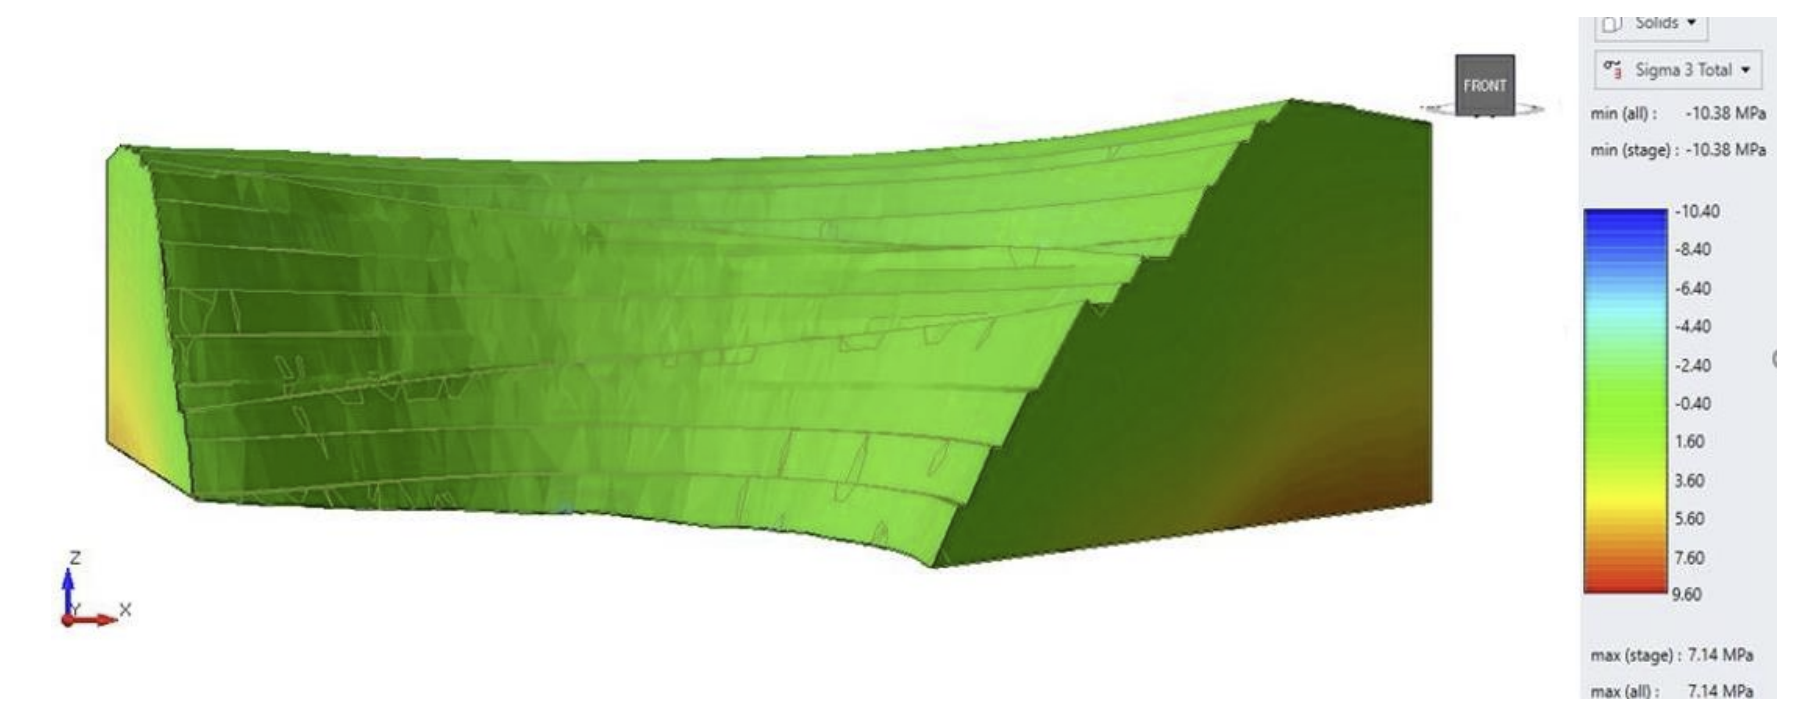 The image shows front view of the maximum stress distribution within north wall.